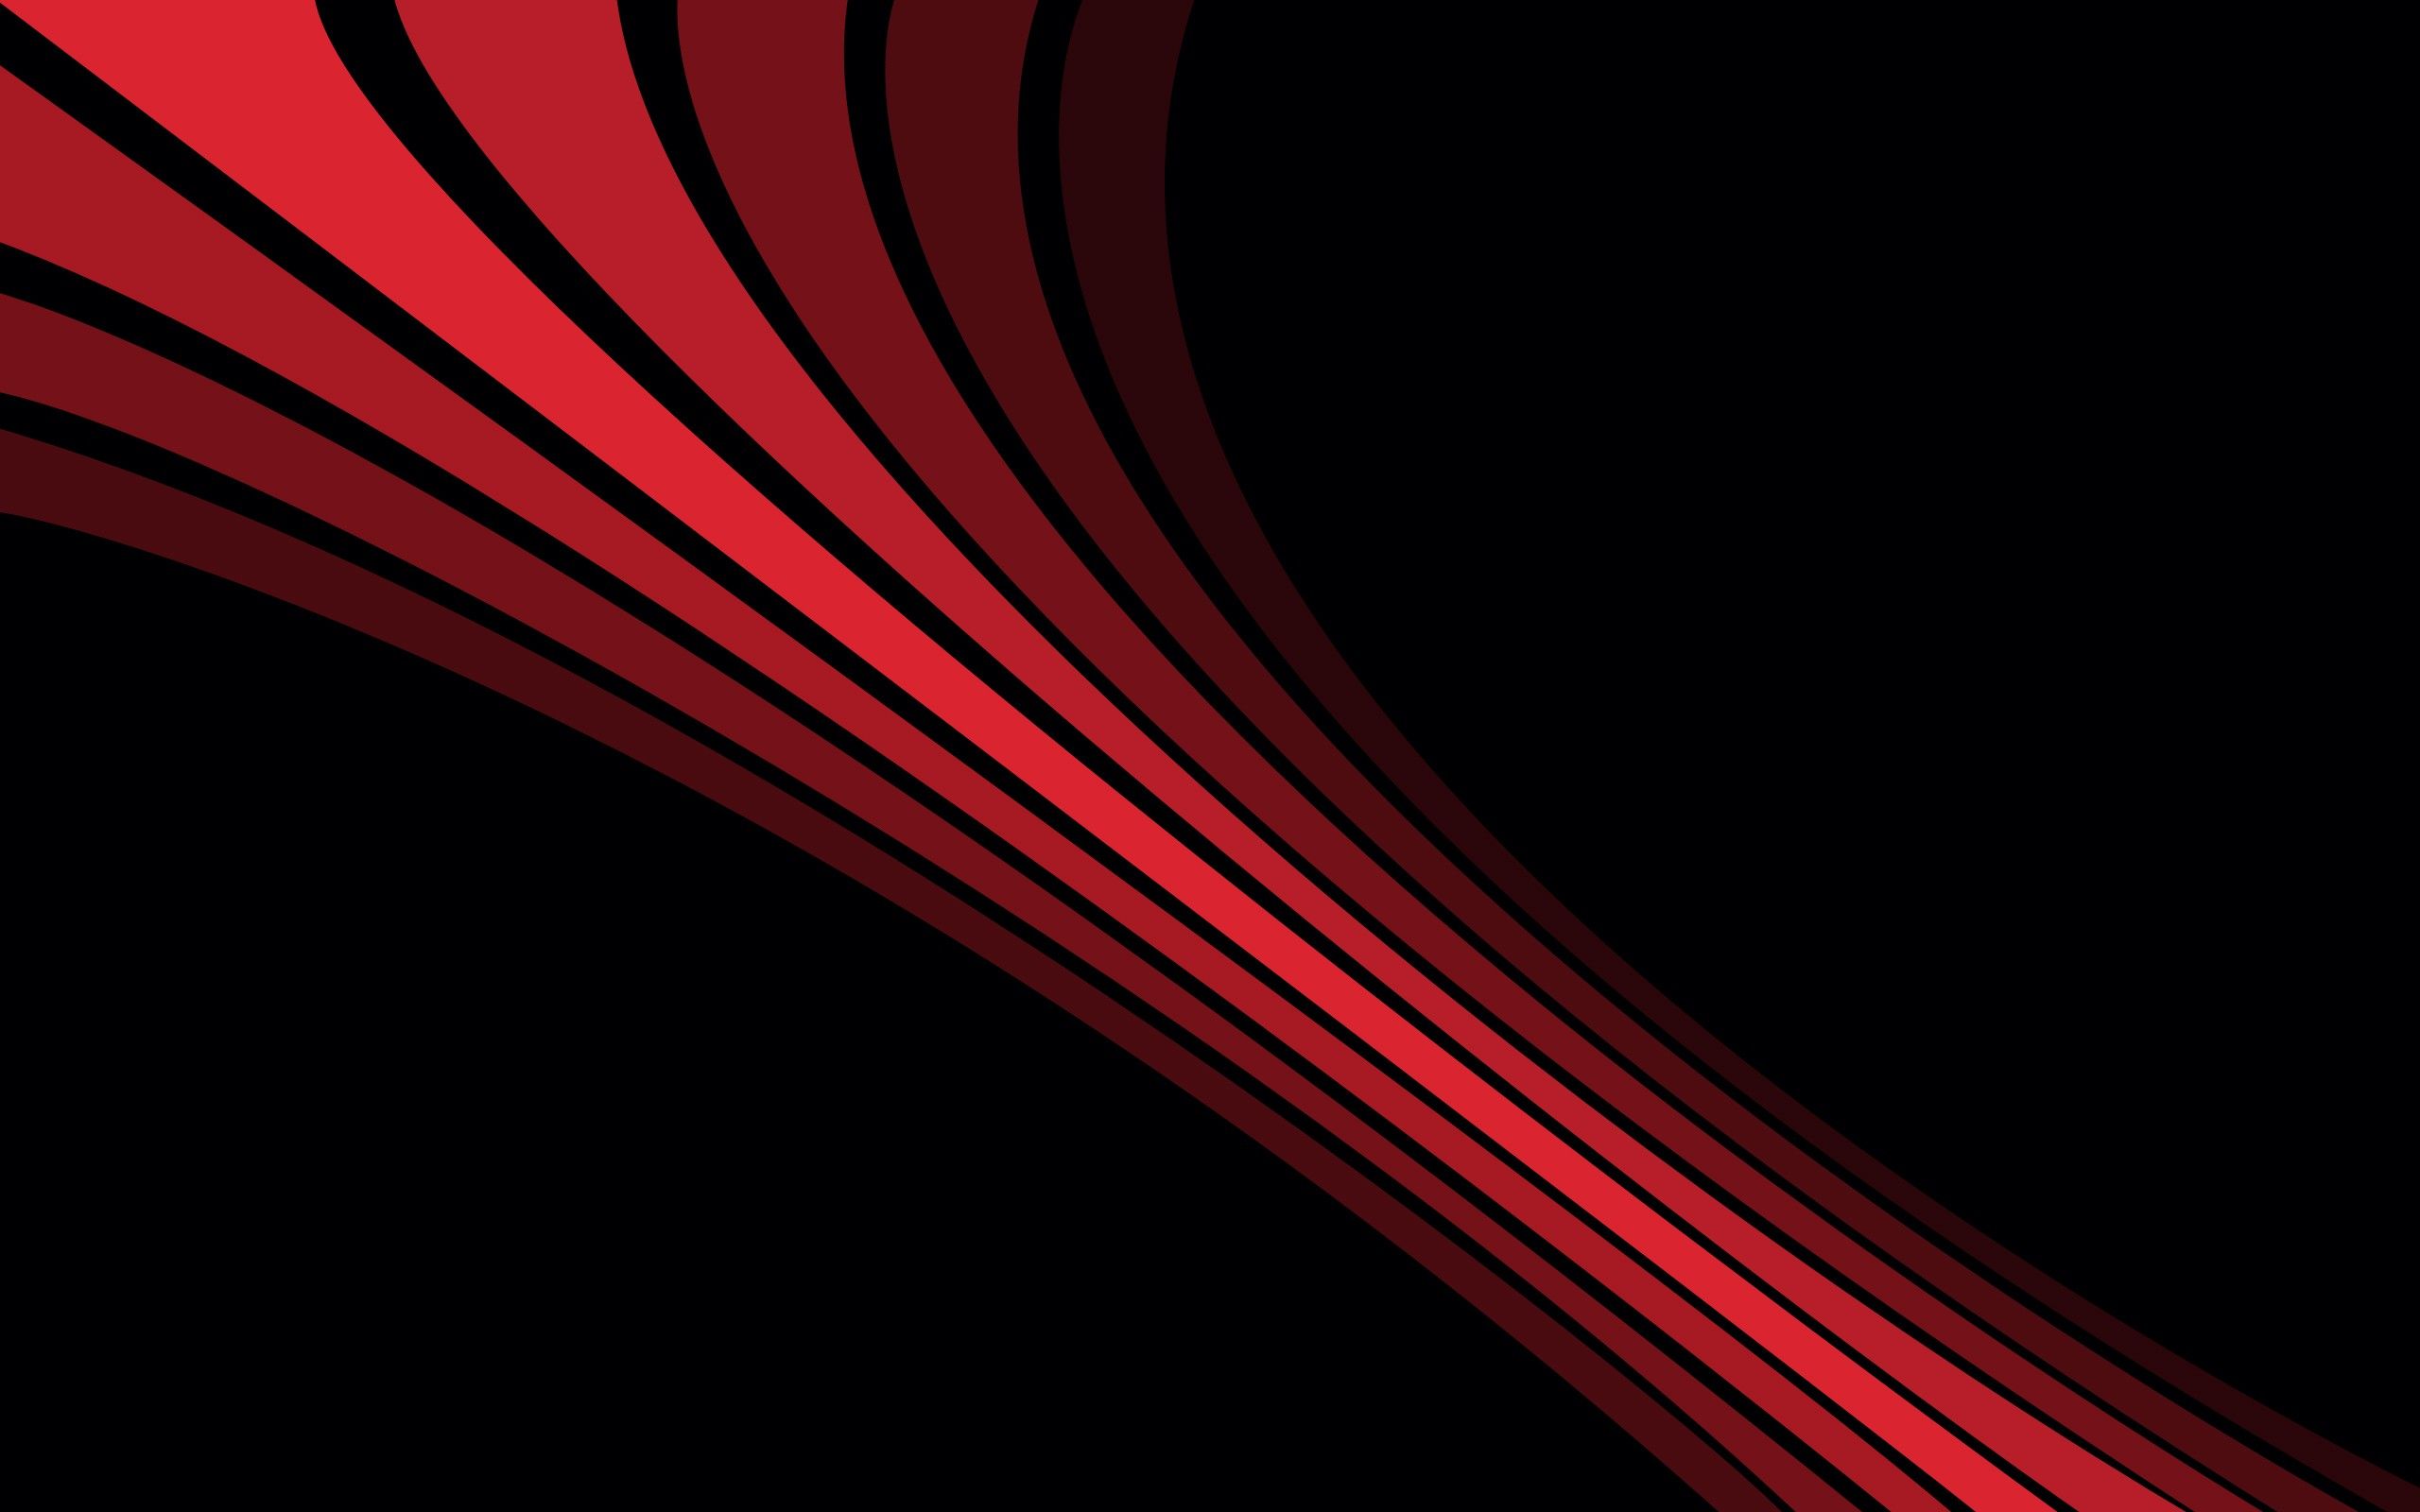 black background, #red, #lines, #simple background, #abstract